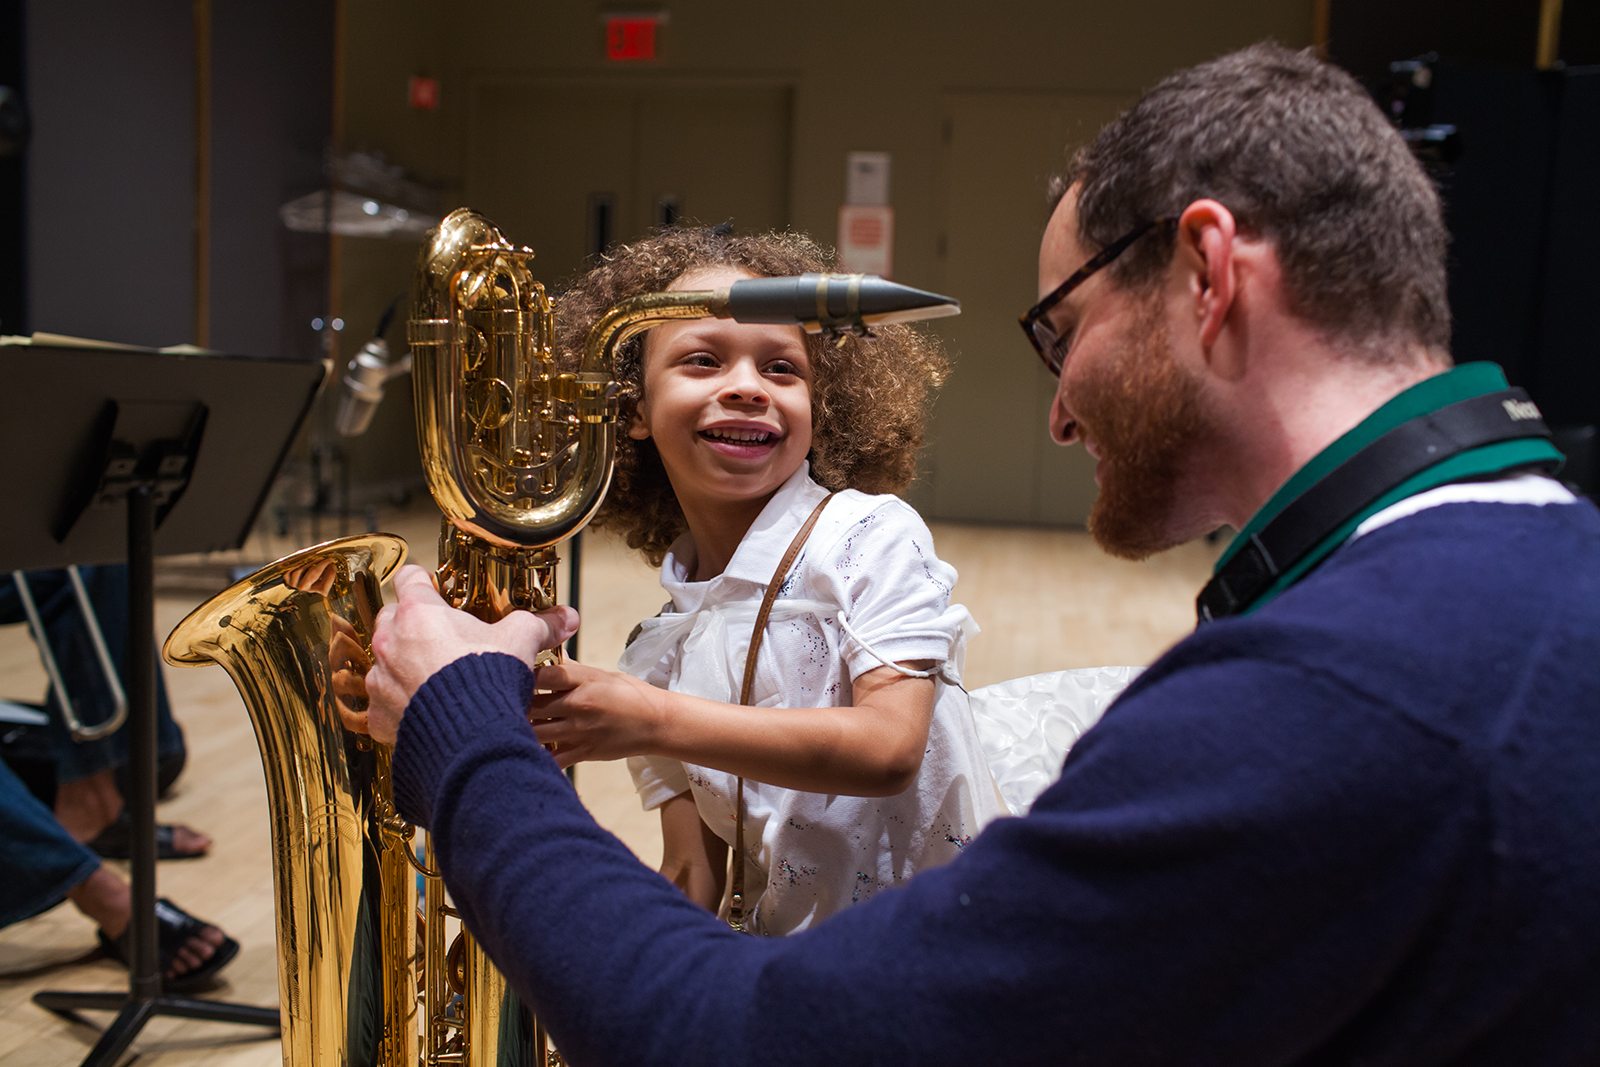 WeBop! Family Jazz Party: Painted Beats at the Jewish Museum